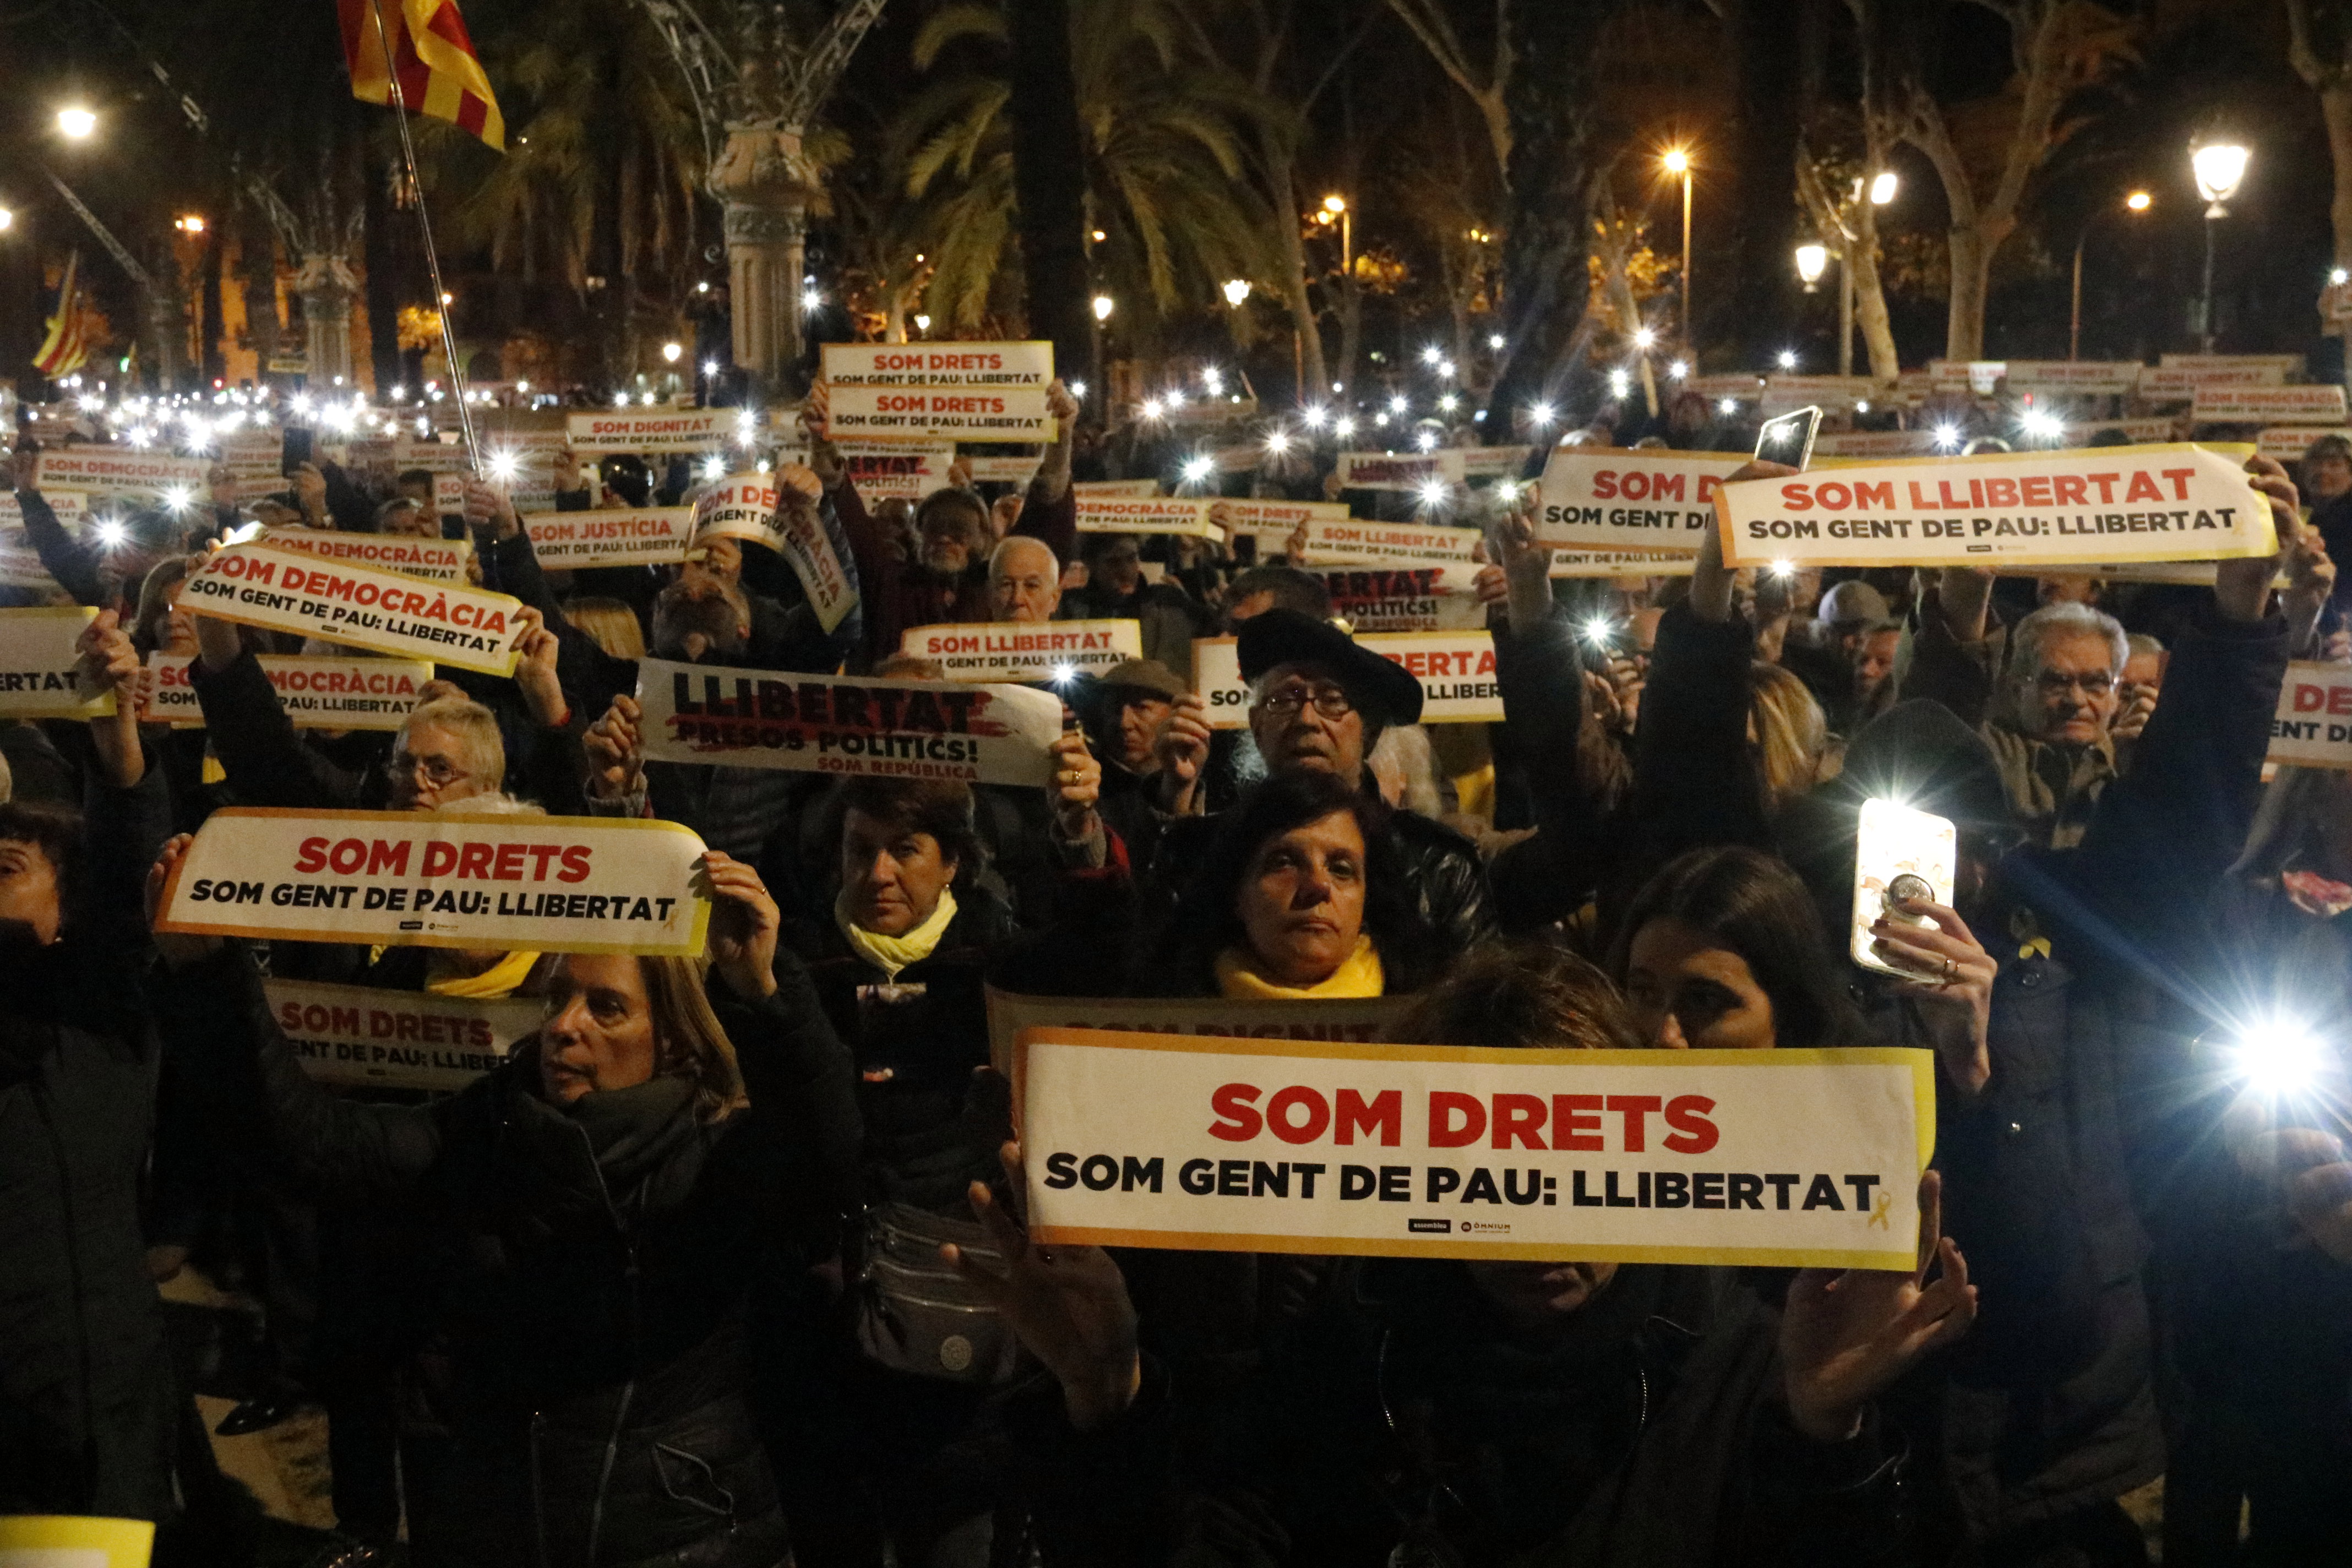 Participants in the demonstration to demand freedom for Jordi Sànchez and Jordi Cuixart hold a sign reading 'We are Rights' and 'We are people of peace: freedom' with their mobile flashlights lit in Barcelona on January 16, 2018 (by Laura Fíguls)